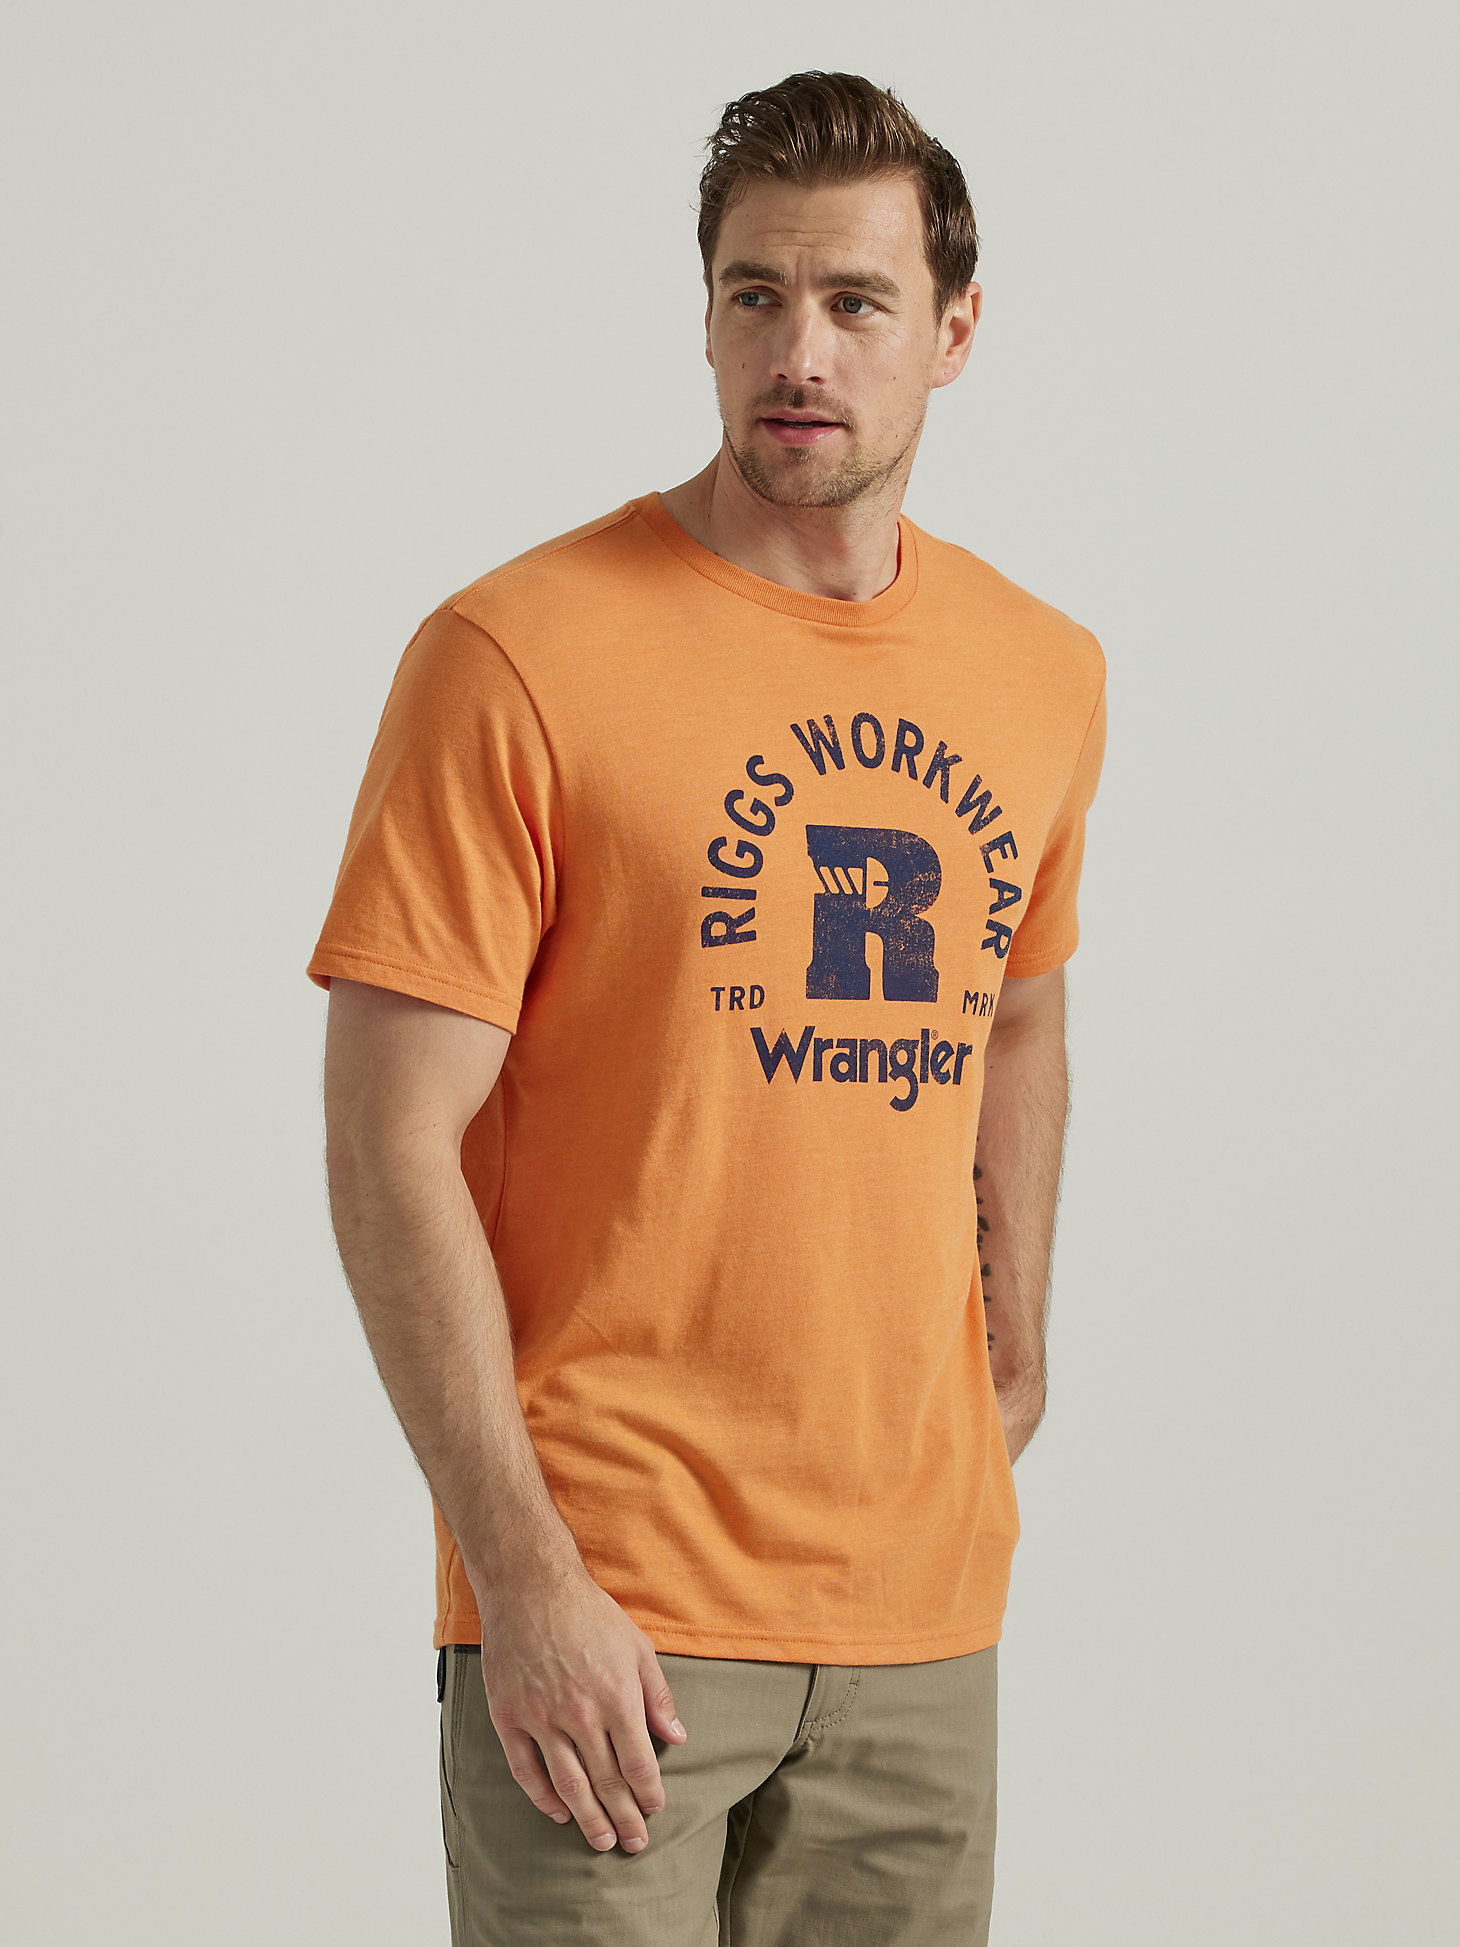 Wrangler® RIGGS Workwear® Relaxed Front Graphic T-Shirt in Harvest Pumpkin alternative view 2